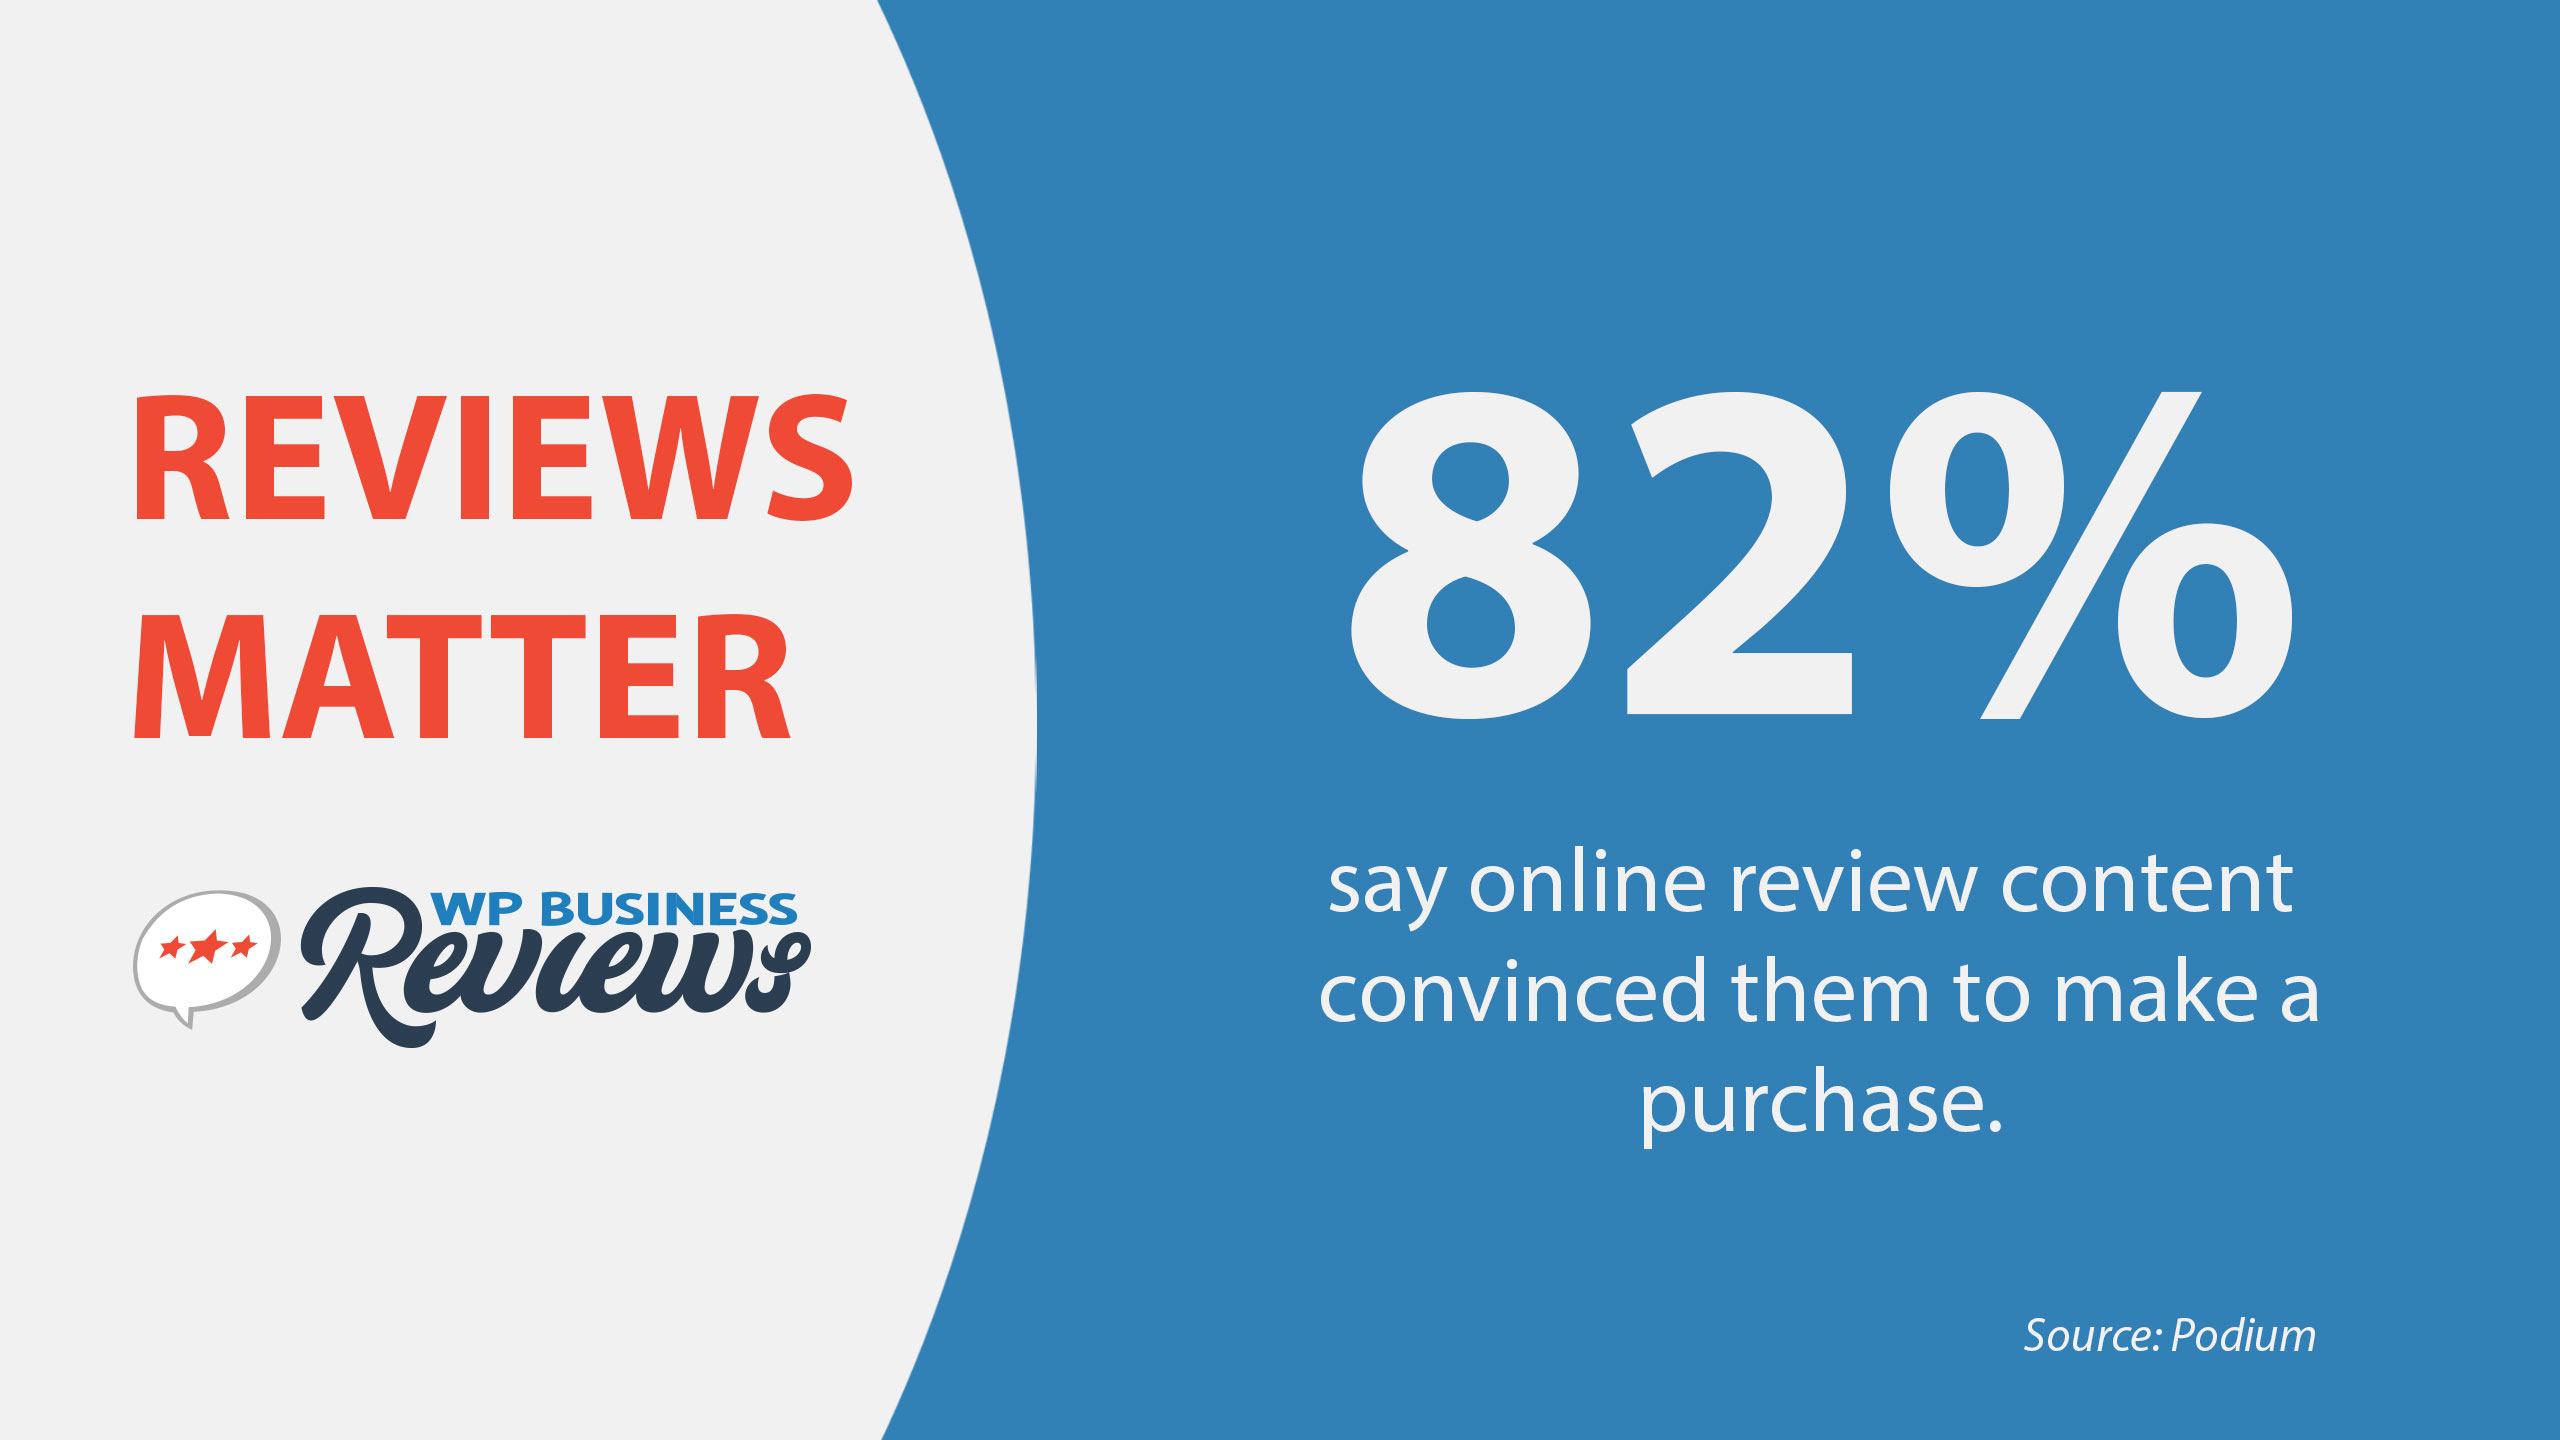 According to Podium: 82% of people say online review content convinced them to make a purchase.